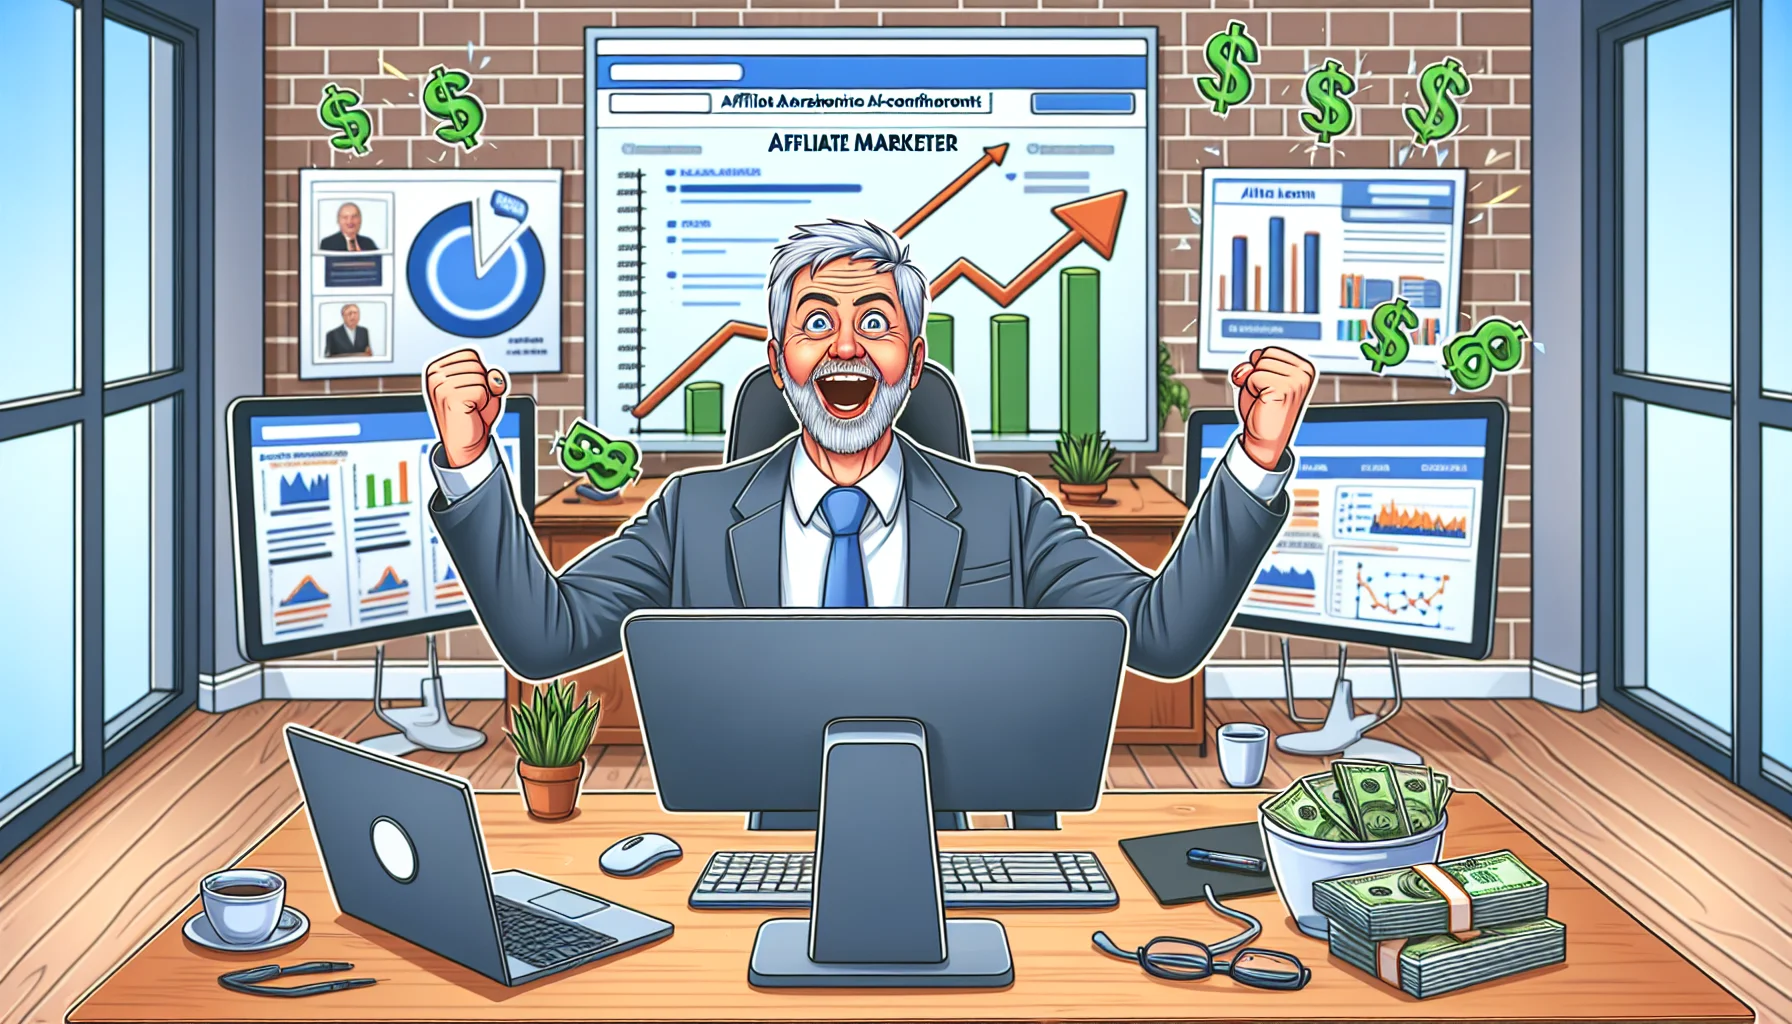 Create a humorous image set in a modern workspace where a male, White, middle-aged affiliate marketer of an unnamed popular e-commerce platform is visibly celebrating. He is surrounded by computer screens displaying affiliate links and rising graphs, suggesting successful online sales. There's a clear aura of success and online money-making. In the room, you can see popular online marketing tools such as SEO charts, analytics dashboards, and digital content strategies. A cartoony, over-sized dollar sign is visible above his head, symbolizing his substantial earnings.